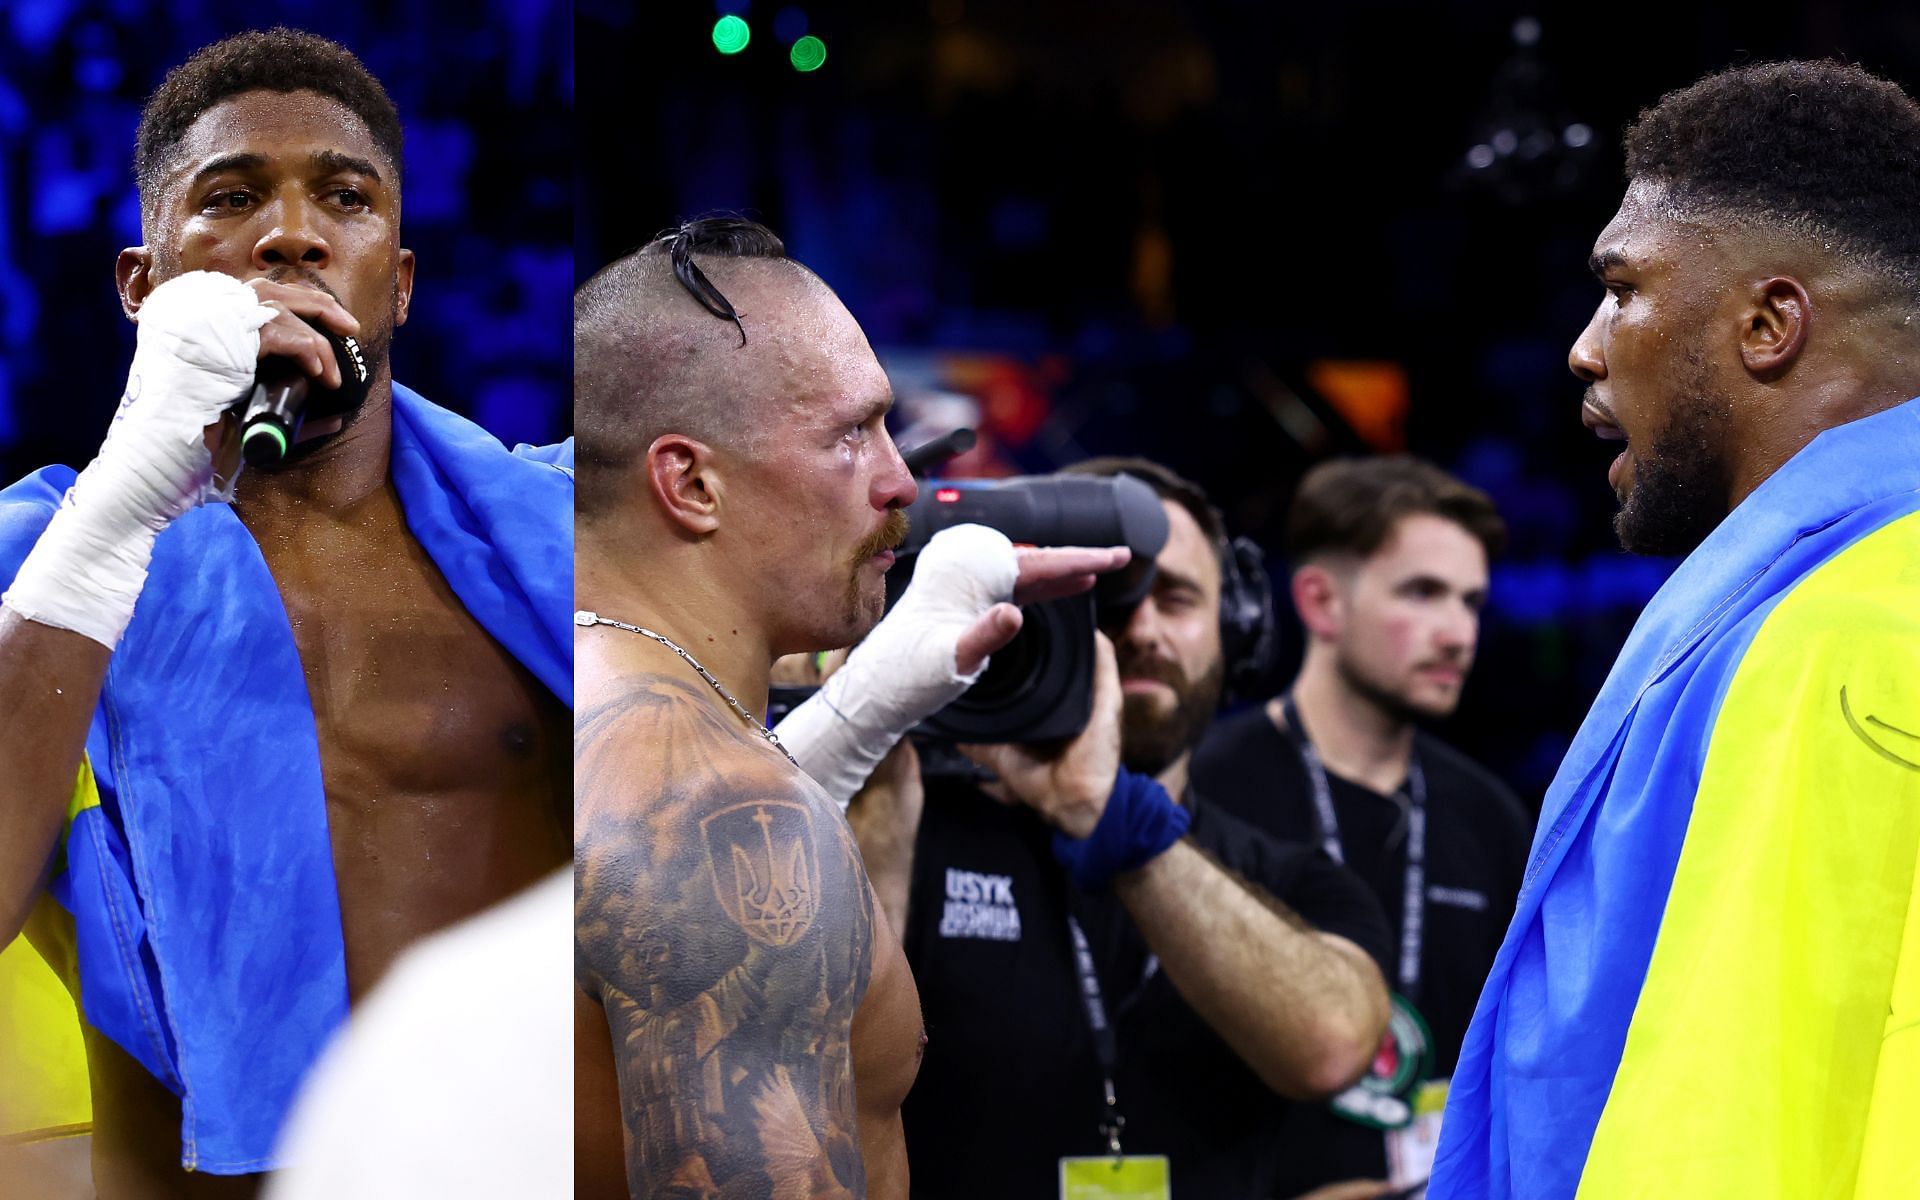 Anthony Joshua addresses the crowd (left) and speaks to Oleksandr Usyk (right). [via Getty Images]